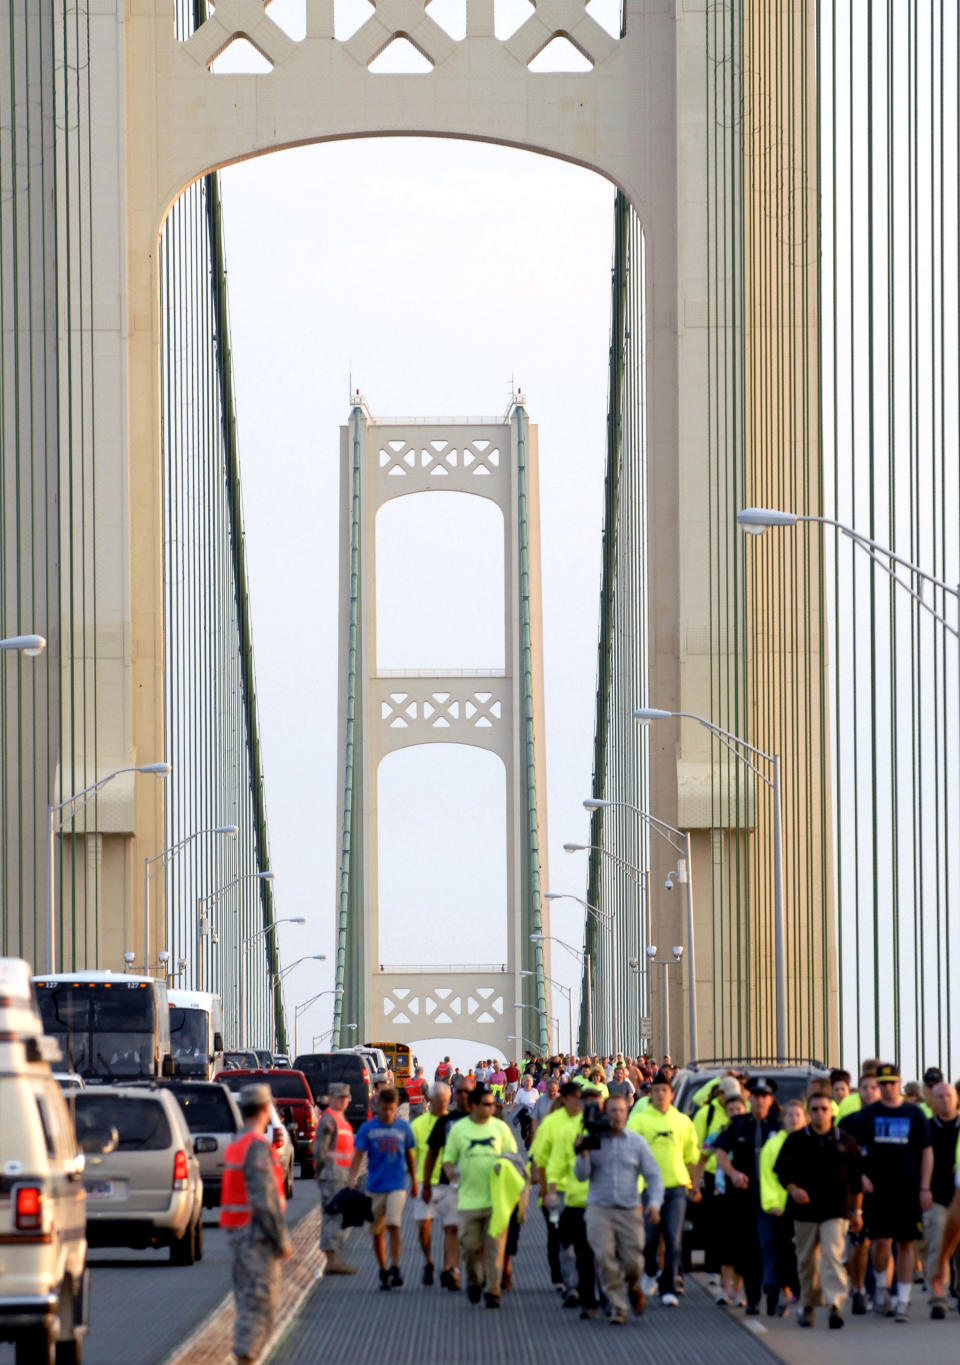 Michigan Gov. Rick Snyder leads the annual Labor Day Mackinac Bridge Walk, Monday, Sept. 3, 2012, across the five-mile span that connect Michigan's upper and lower peninsulas. (AP Photo/John L. Russell)